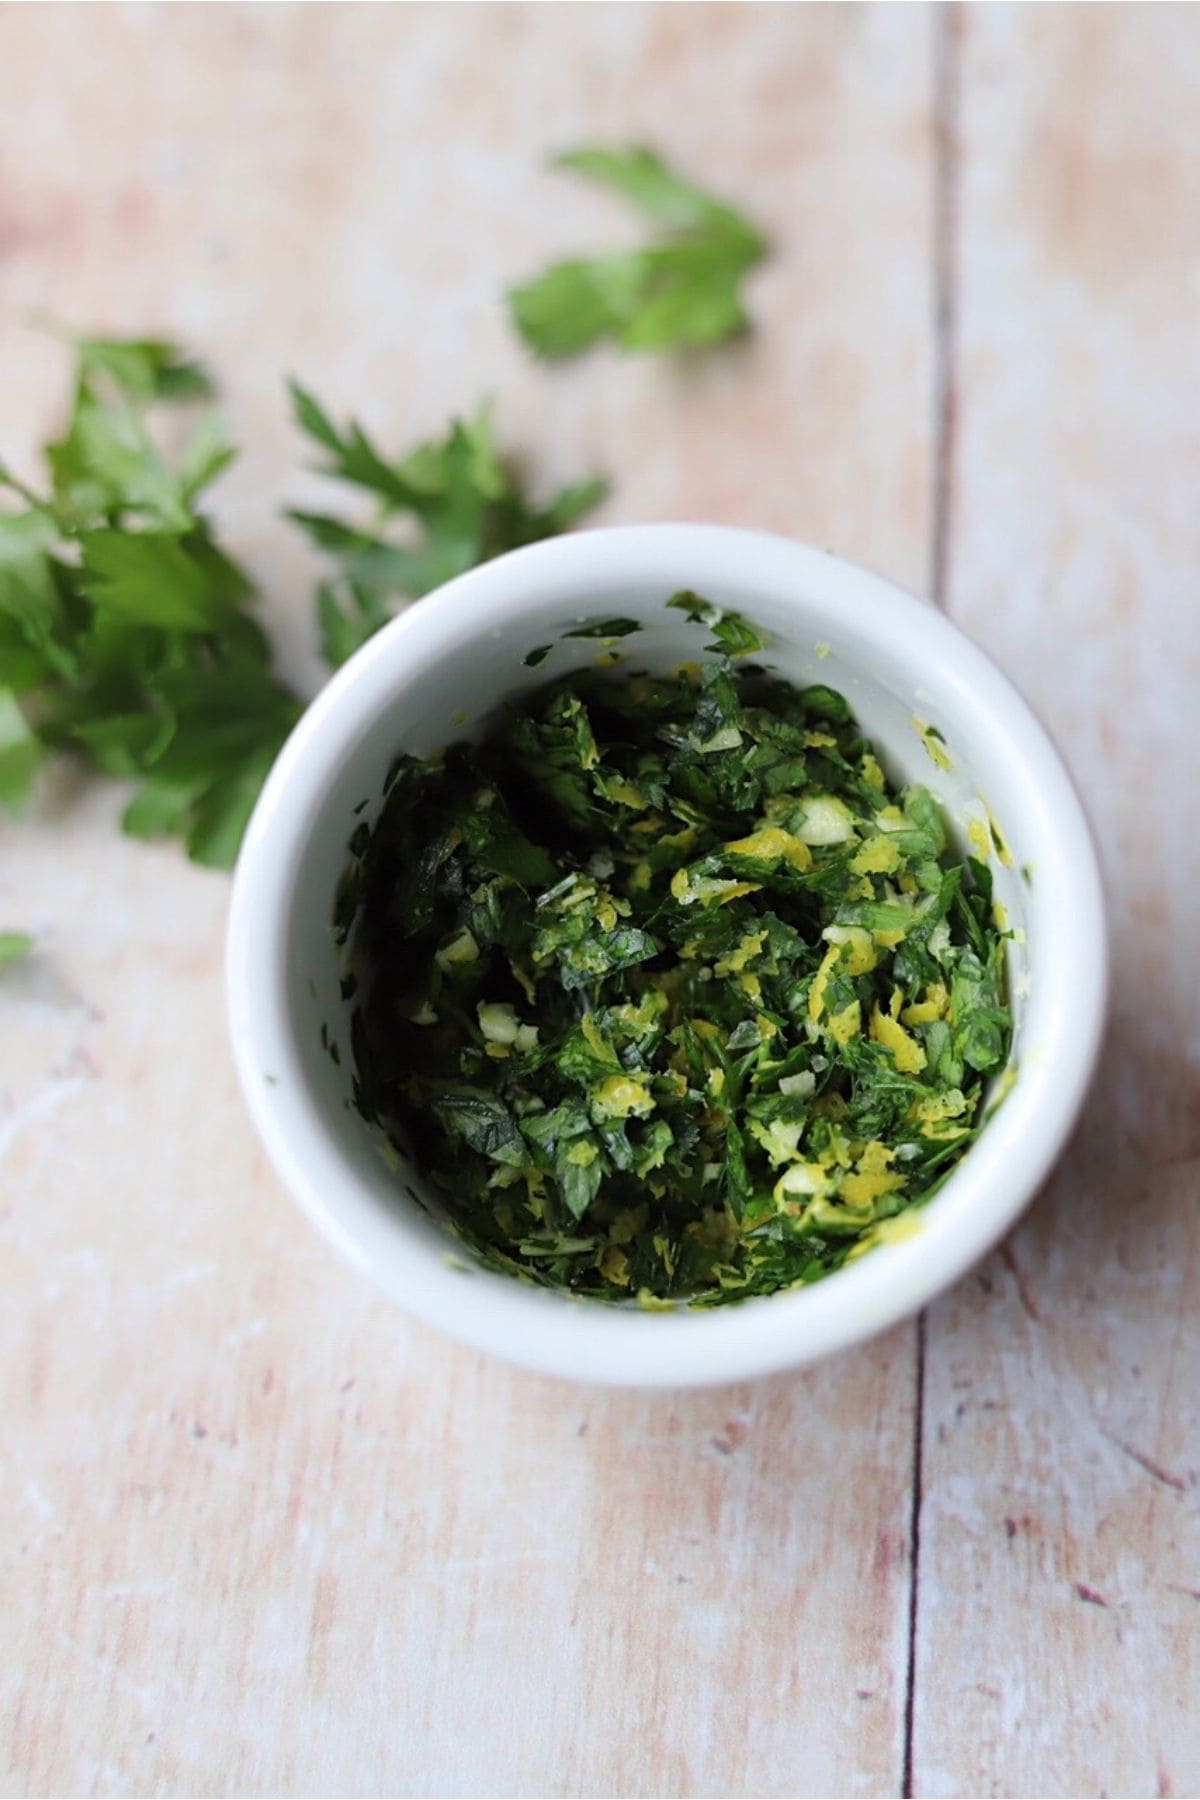 Gremolata in small white bowl on wooden table